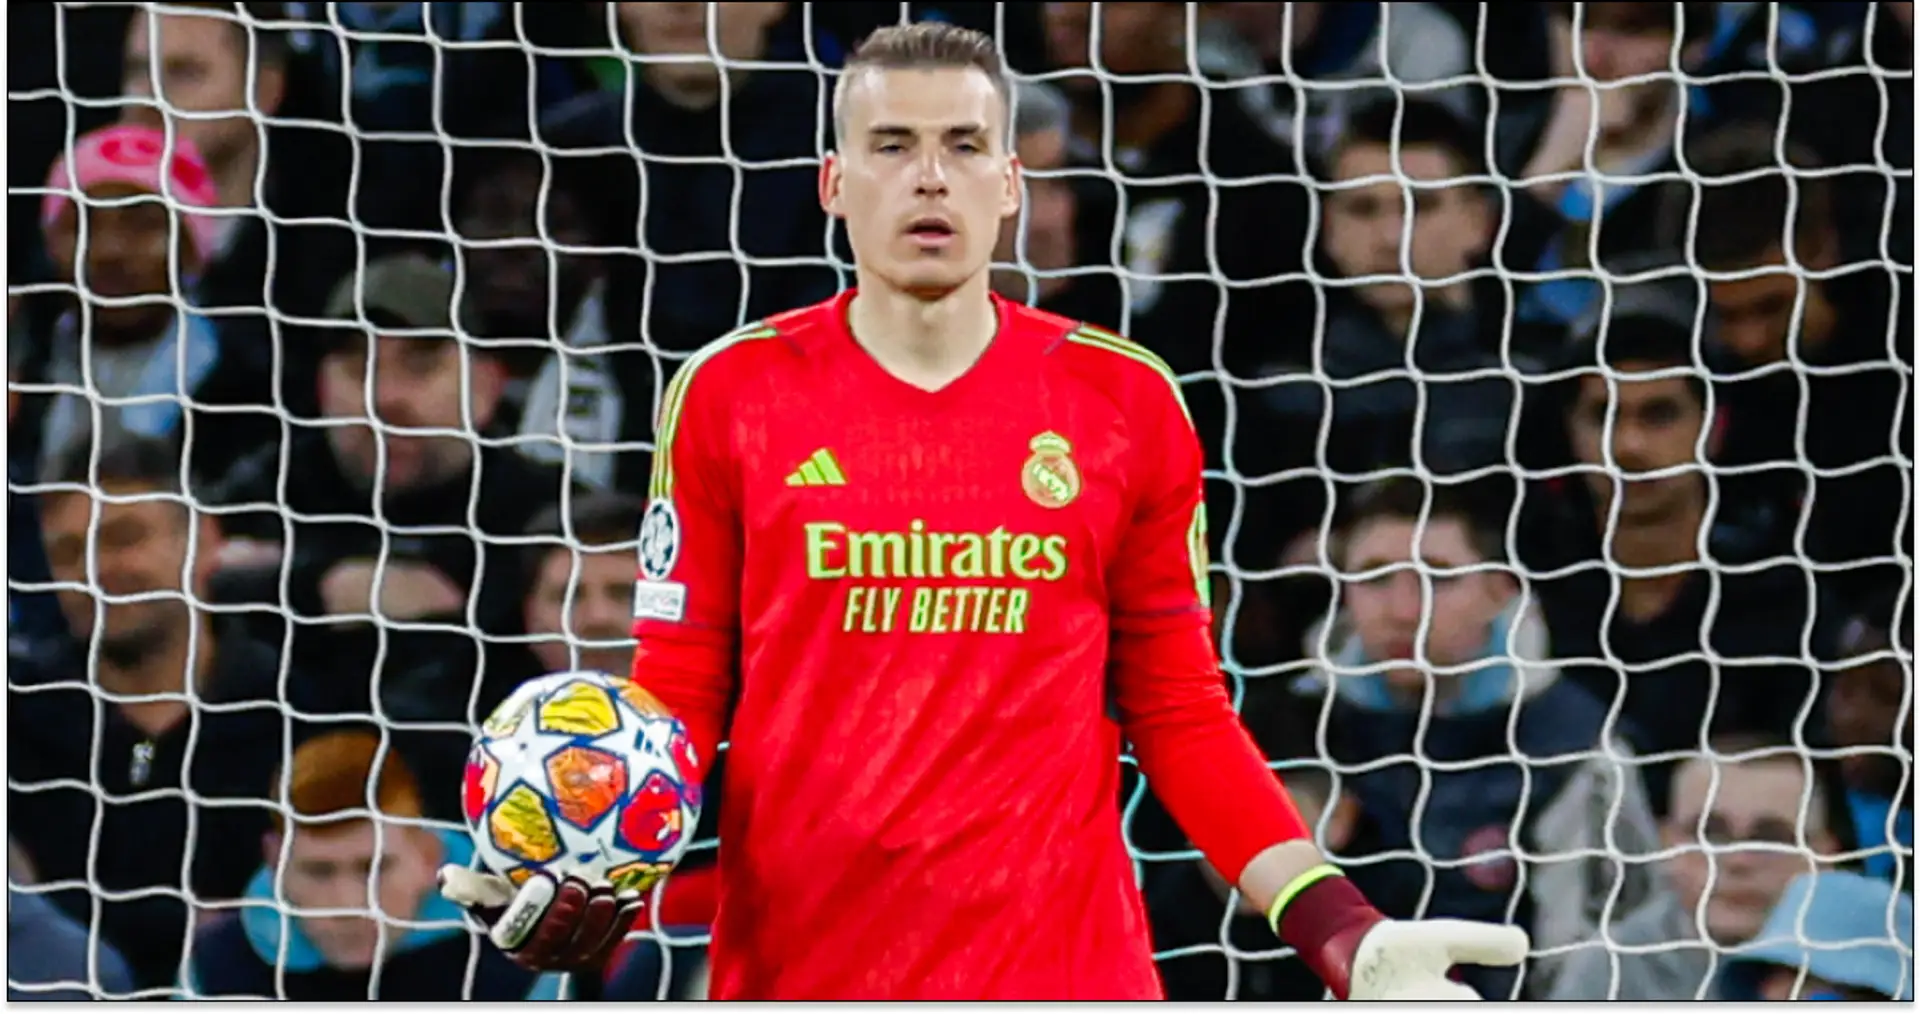 'I knew where Kovacic would go': Lunin's first words after Man City game